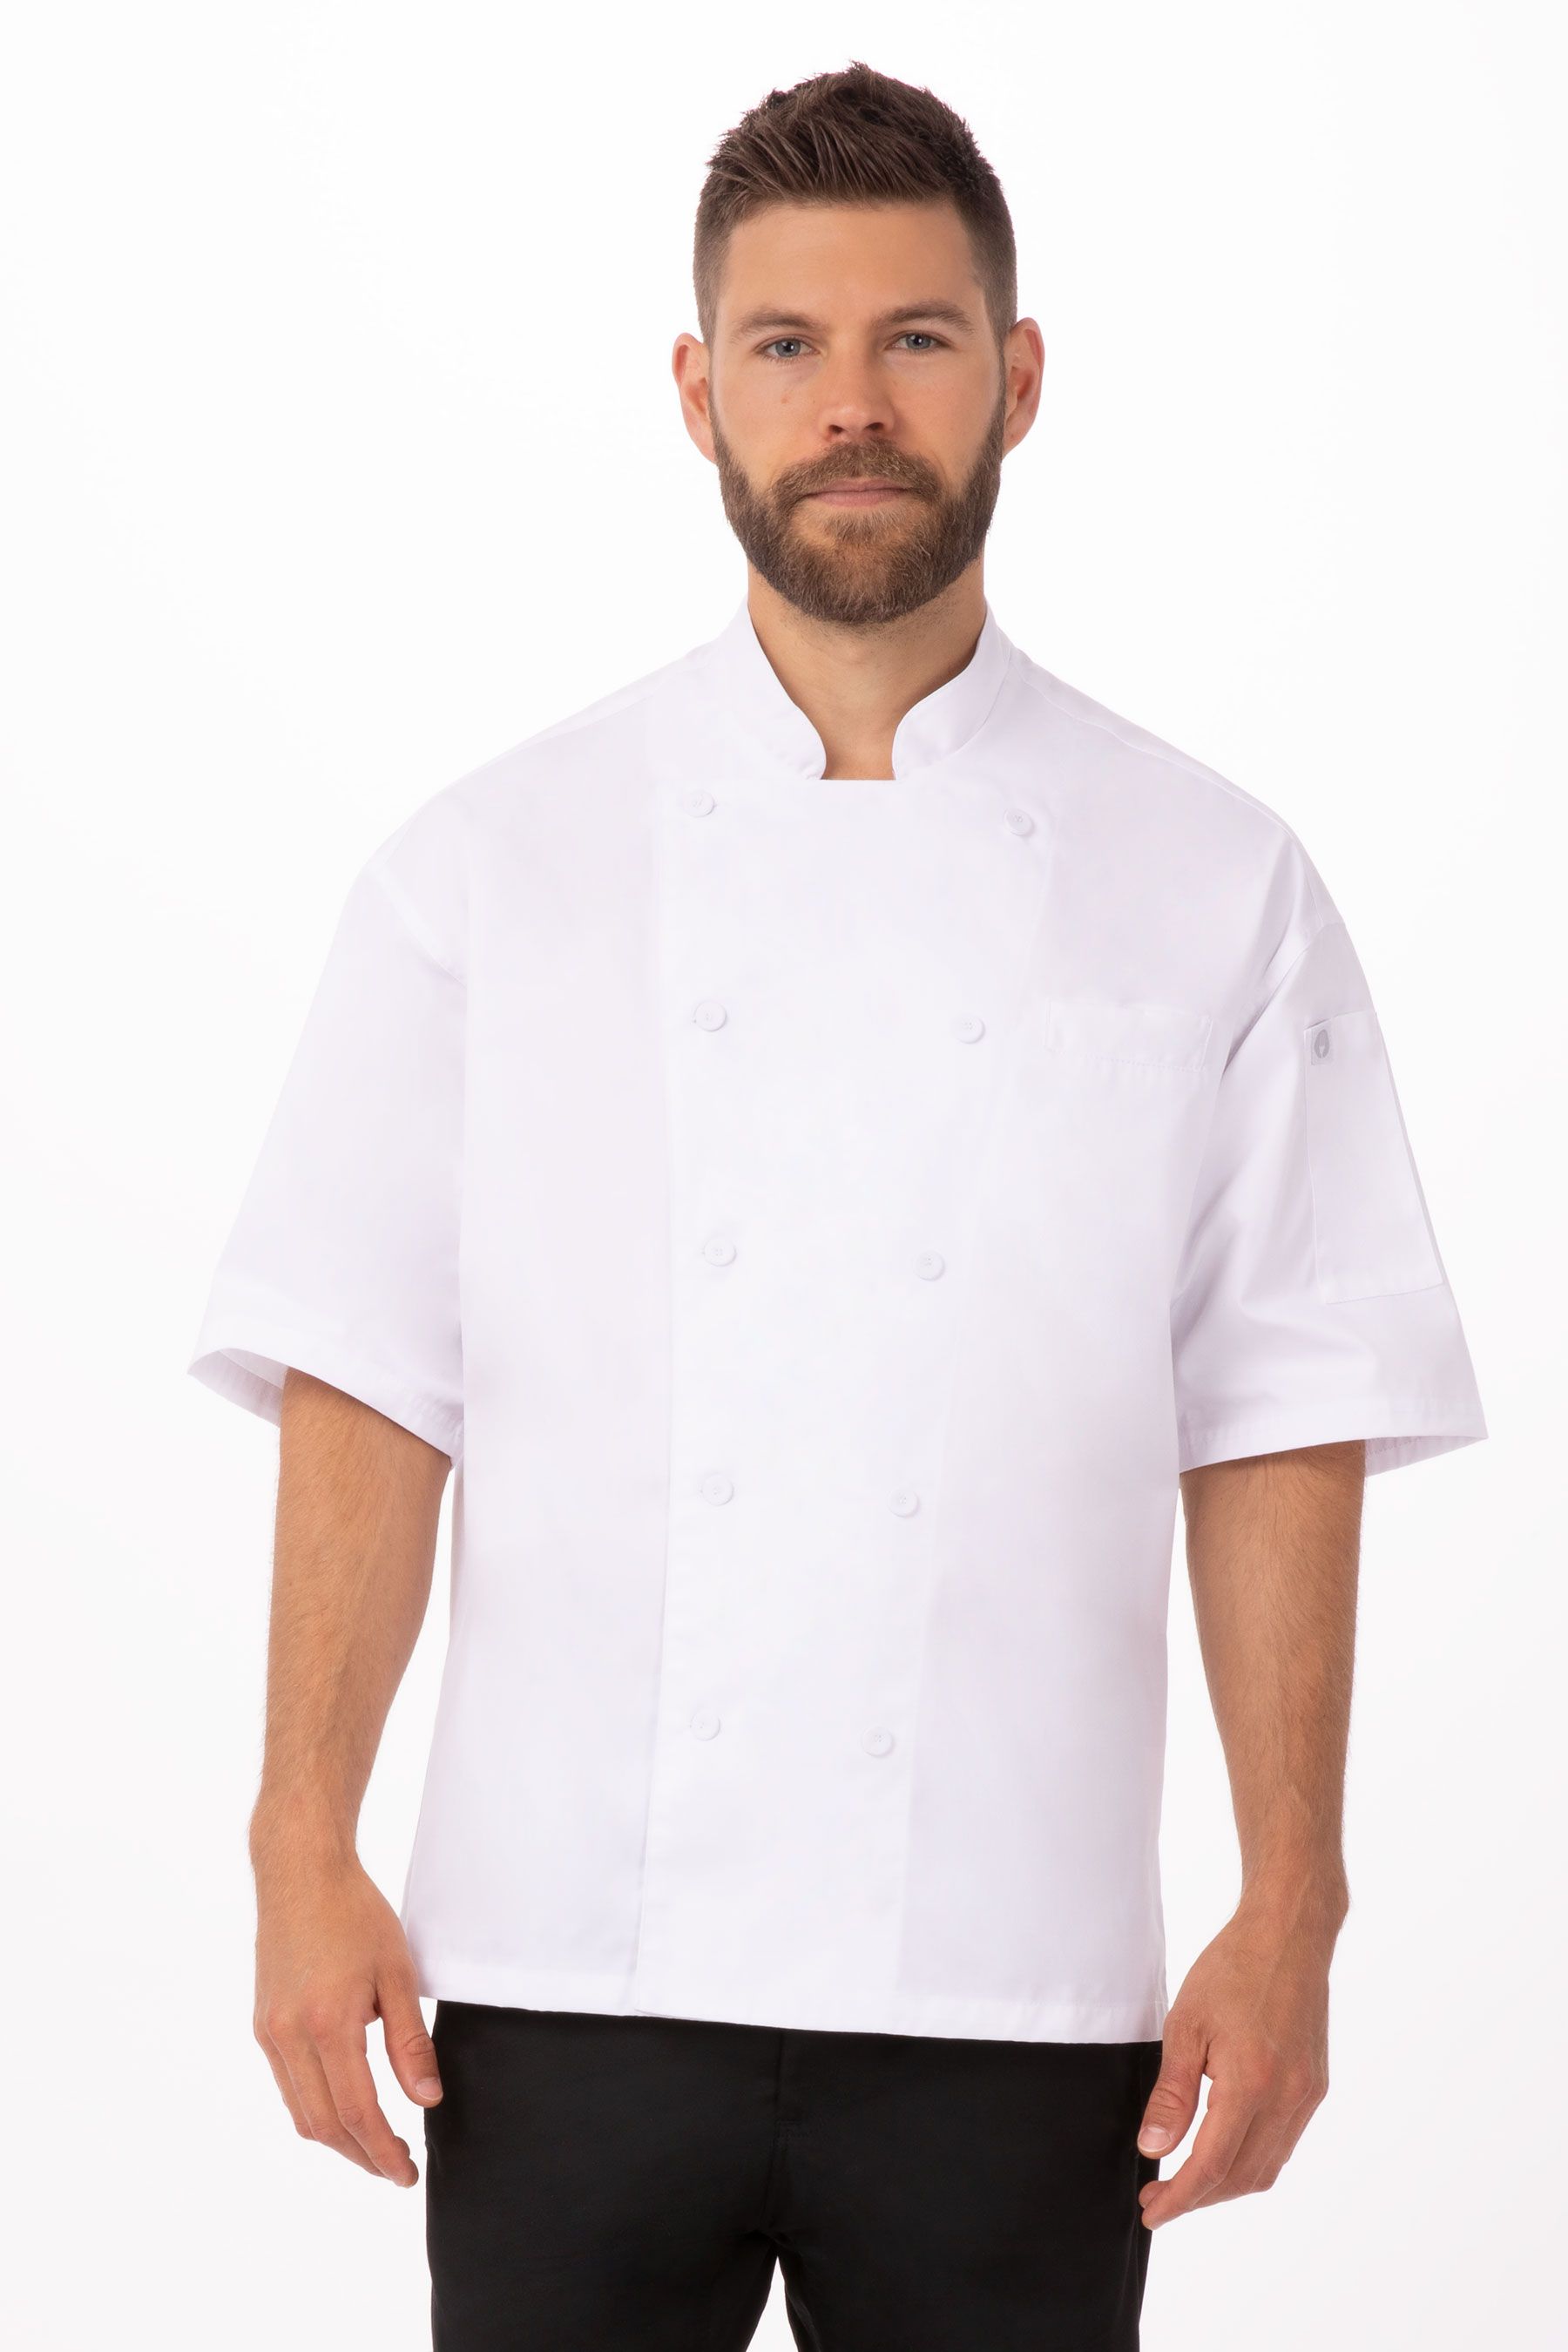 WHITE CHEF JACKET SHORT
SLEEVE PALERMO COOL VENT XL
EA